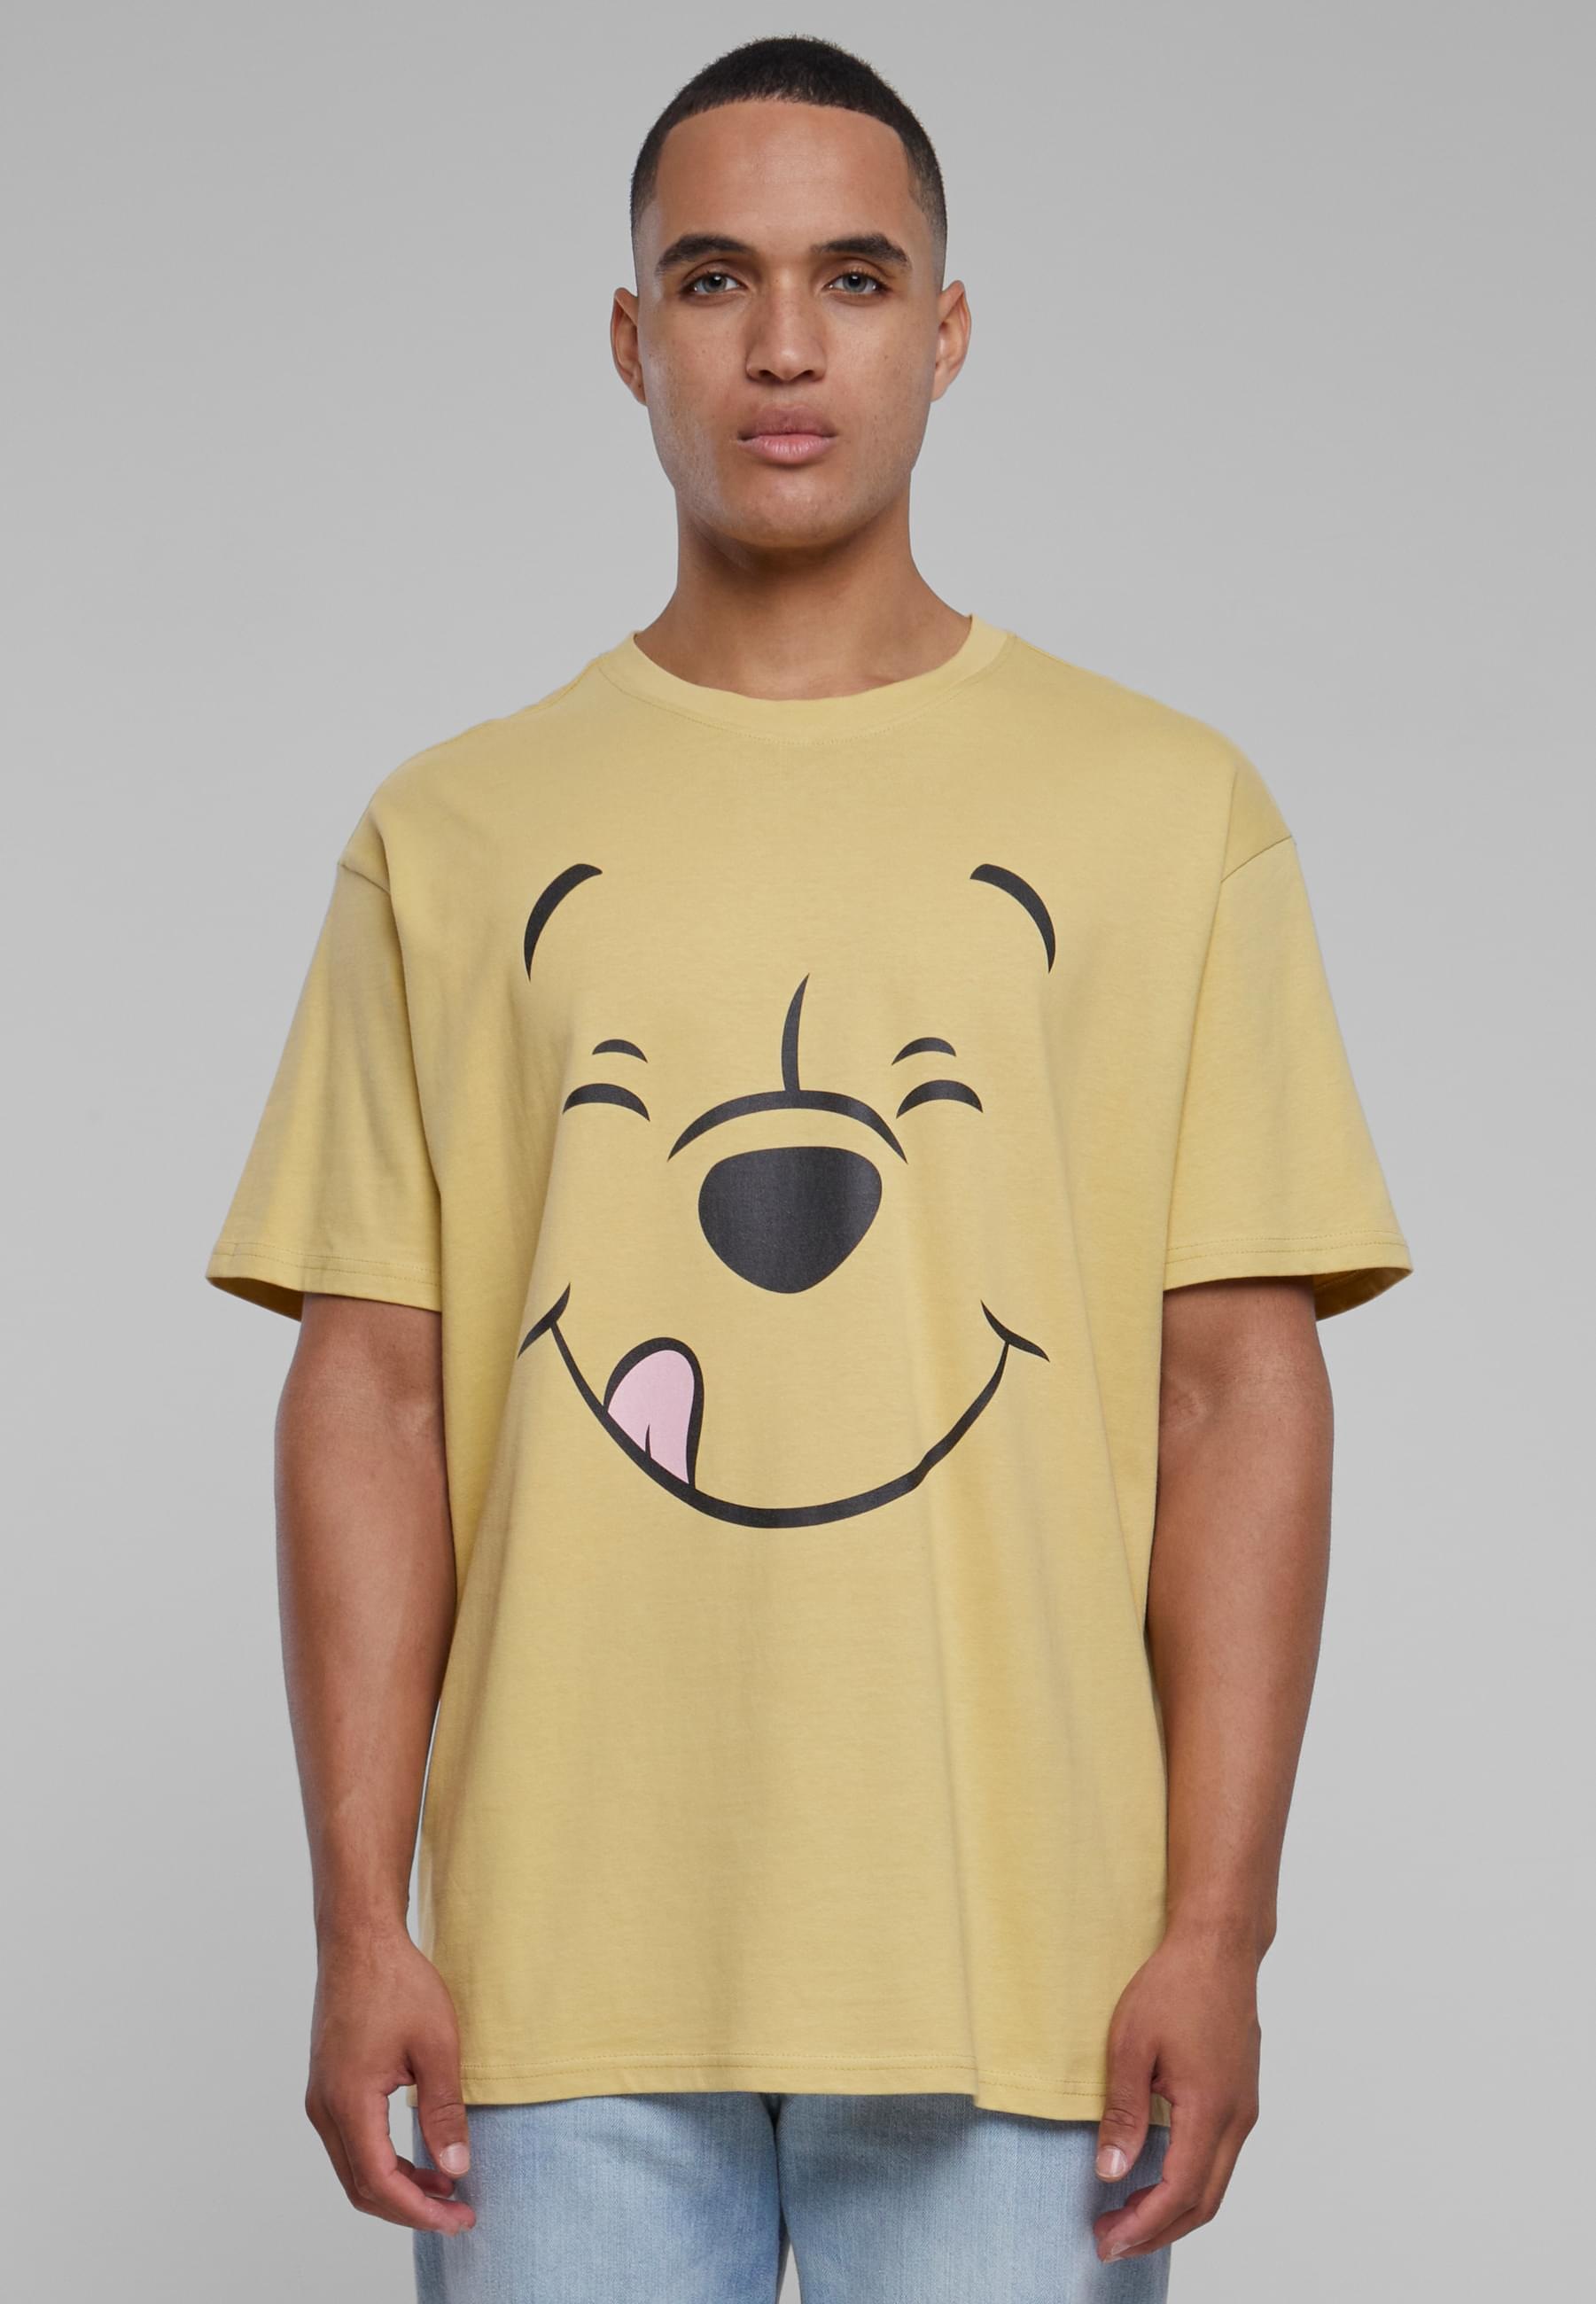 Upscale by Mister Tee T-Shirt »Upscale by Mister Tee Herren Disney 100 Winnie Pooh Face Tee«, (1 tlg.)